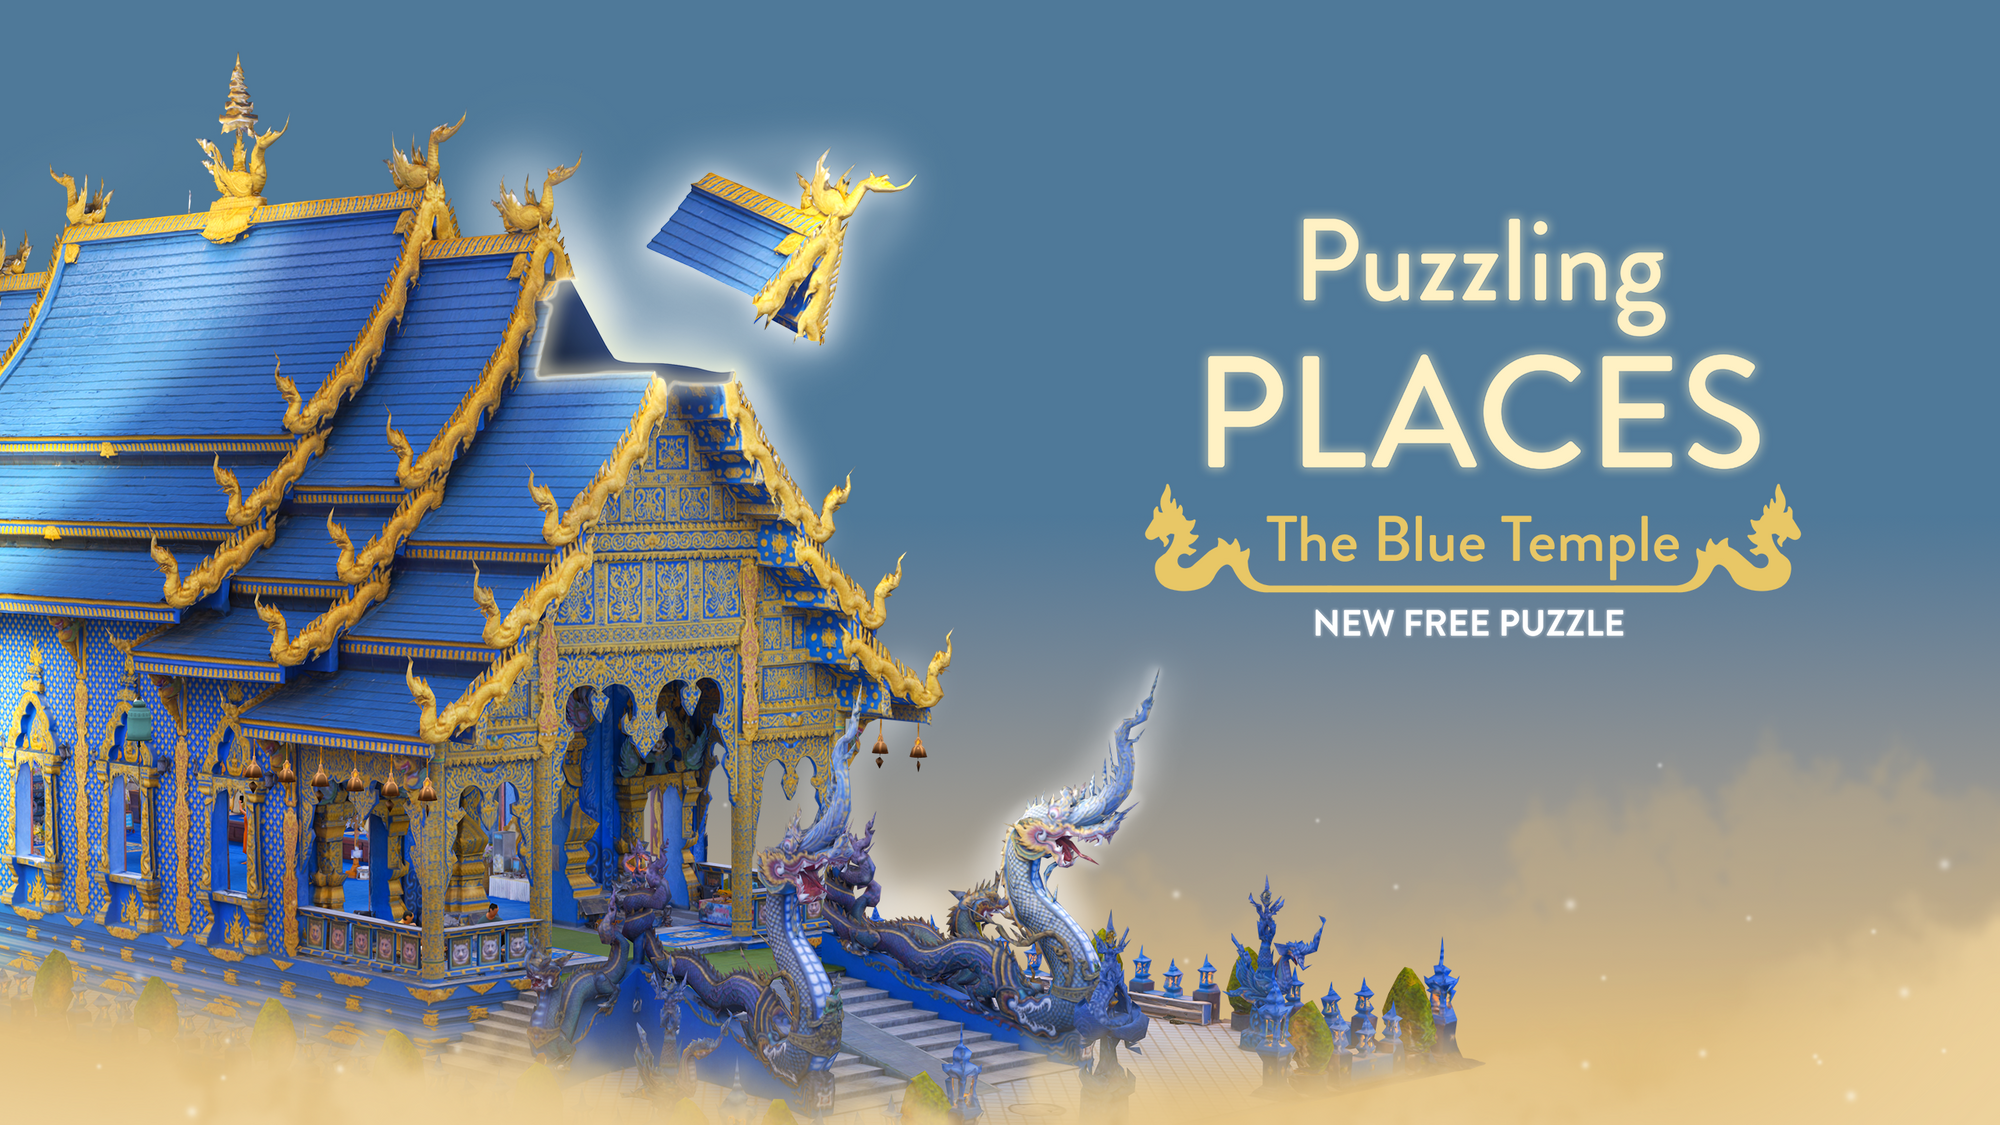 🎁 New FREE Puzzle - Blue Temple